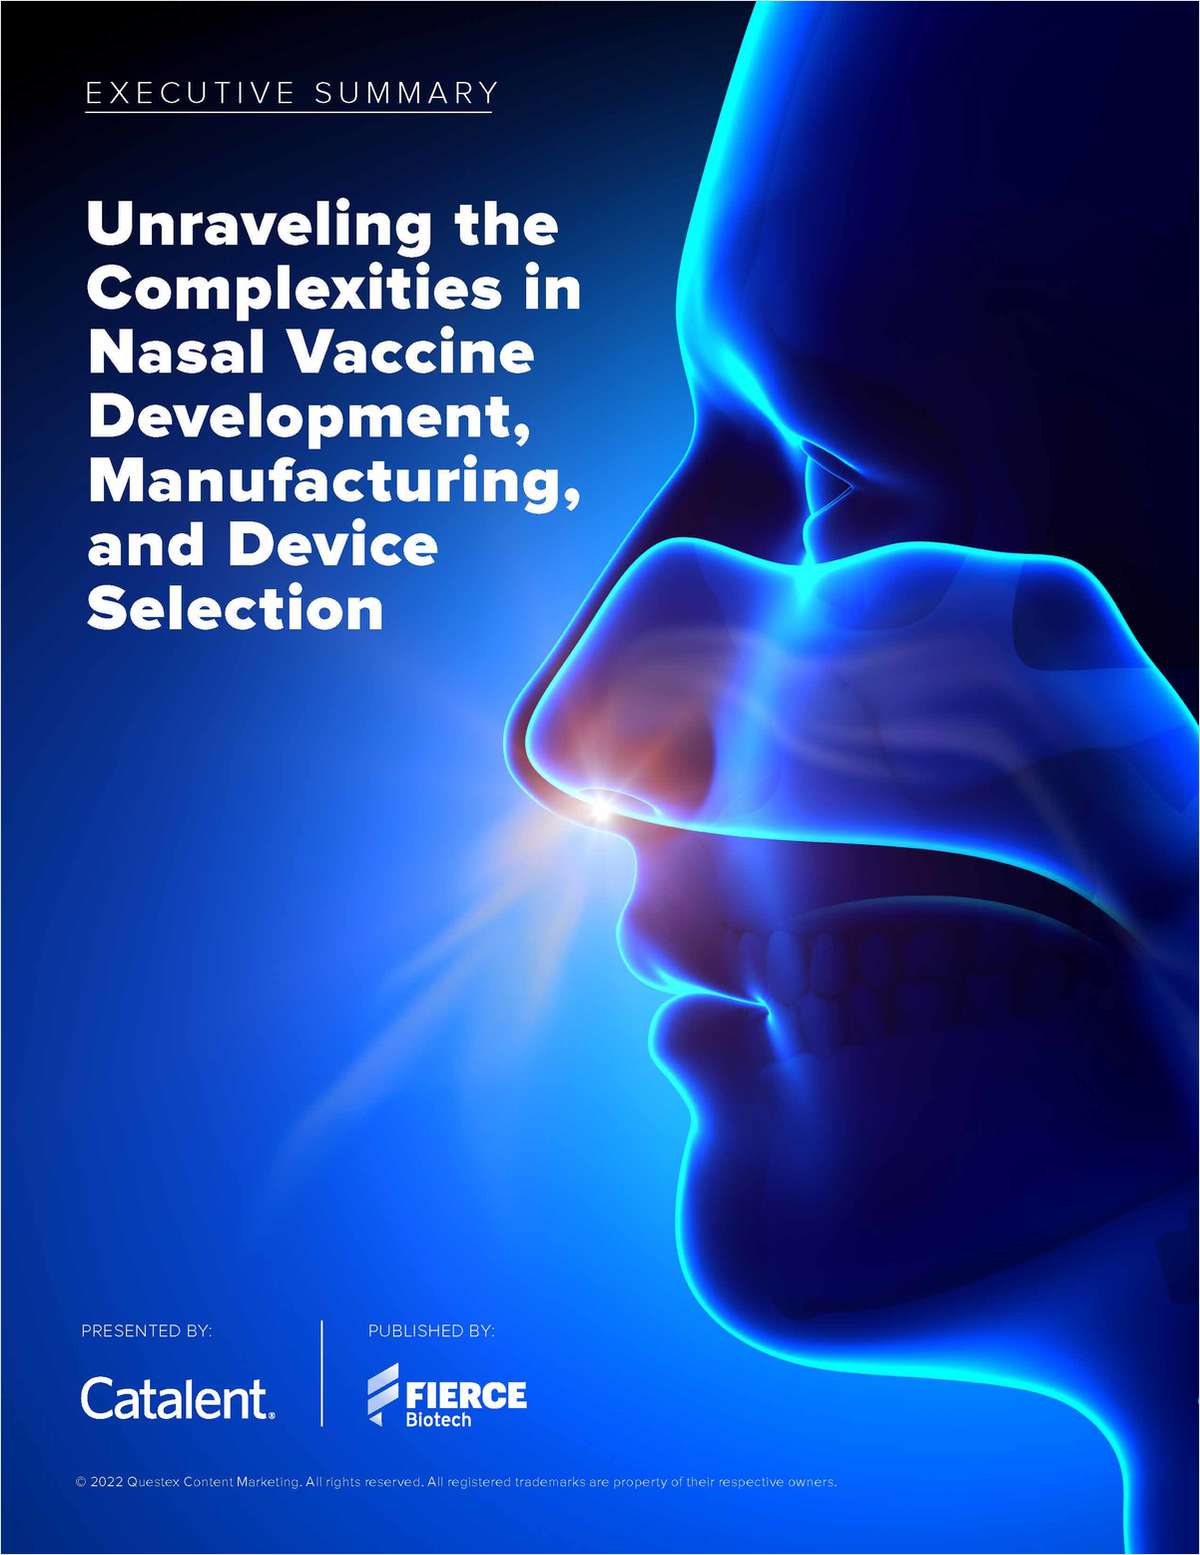 Unraveling the Complexities in Nasal Vaccine Development, Manufacturing, and Device Selection